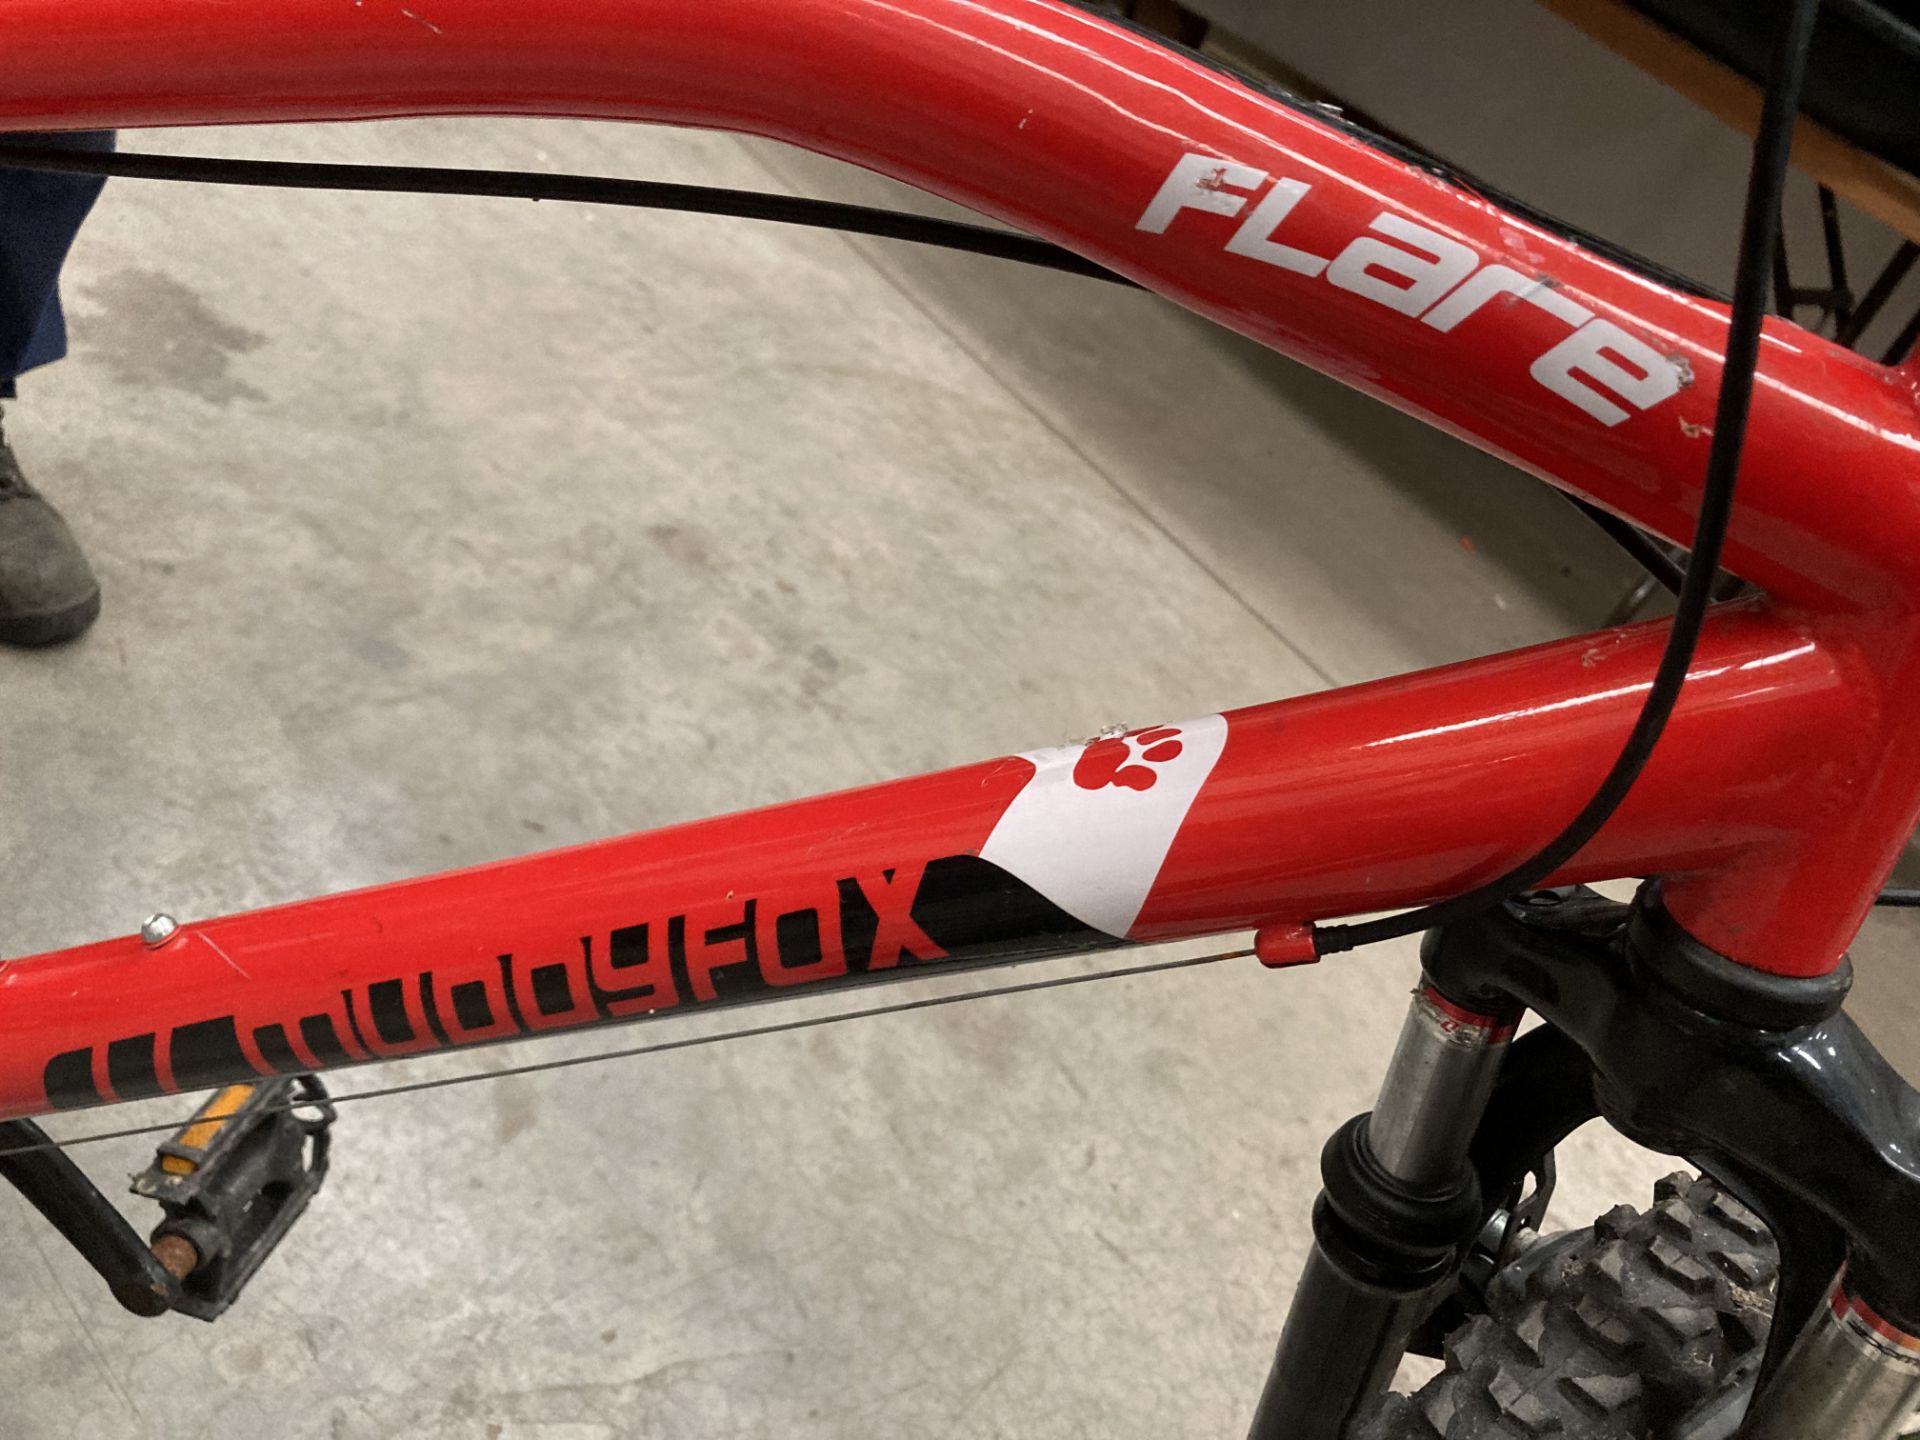 A Muddy Fox Flare 18 speed mountain bike in red - 20 " frame - Image 2 of 2